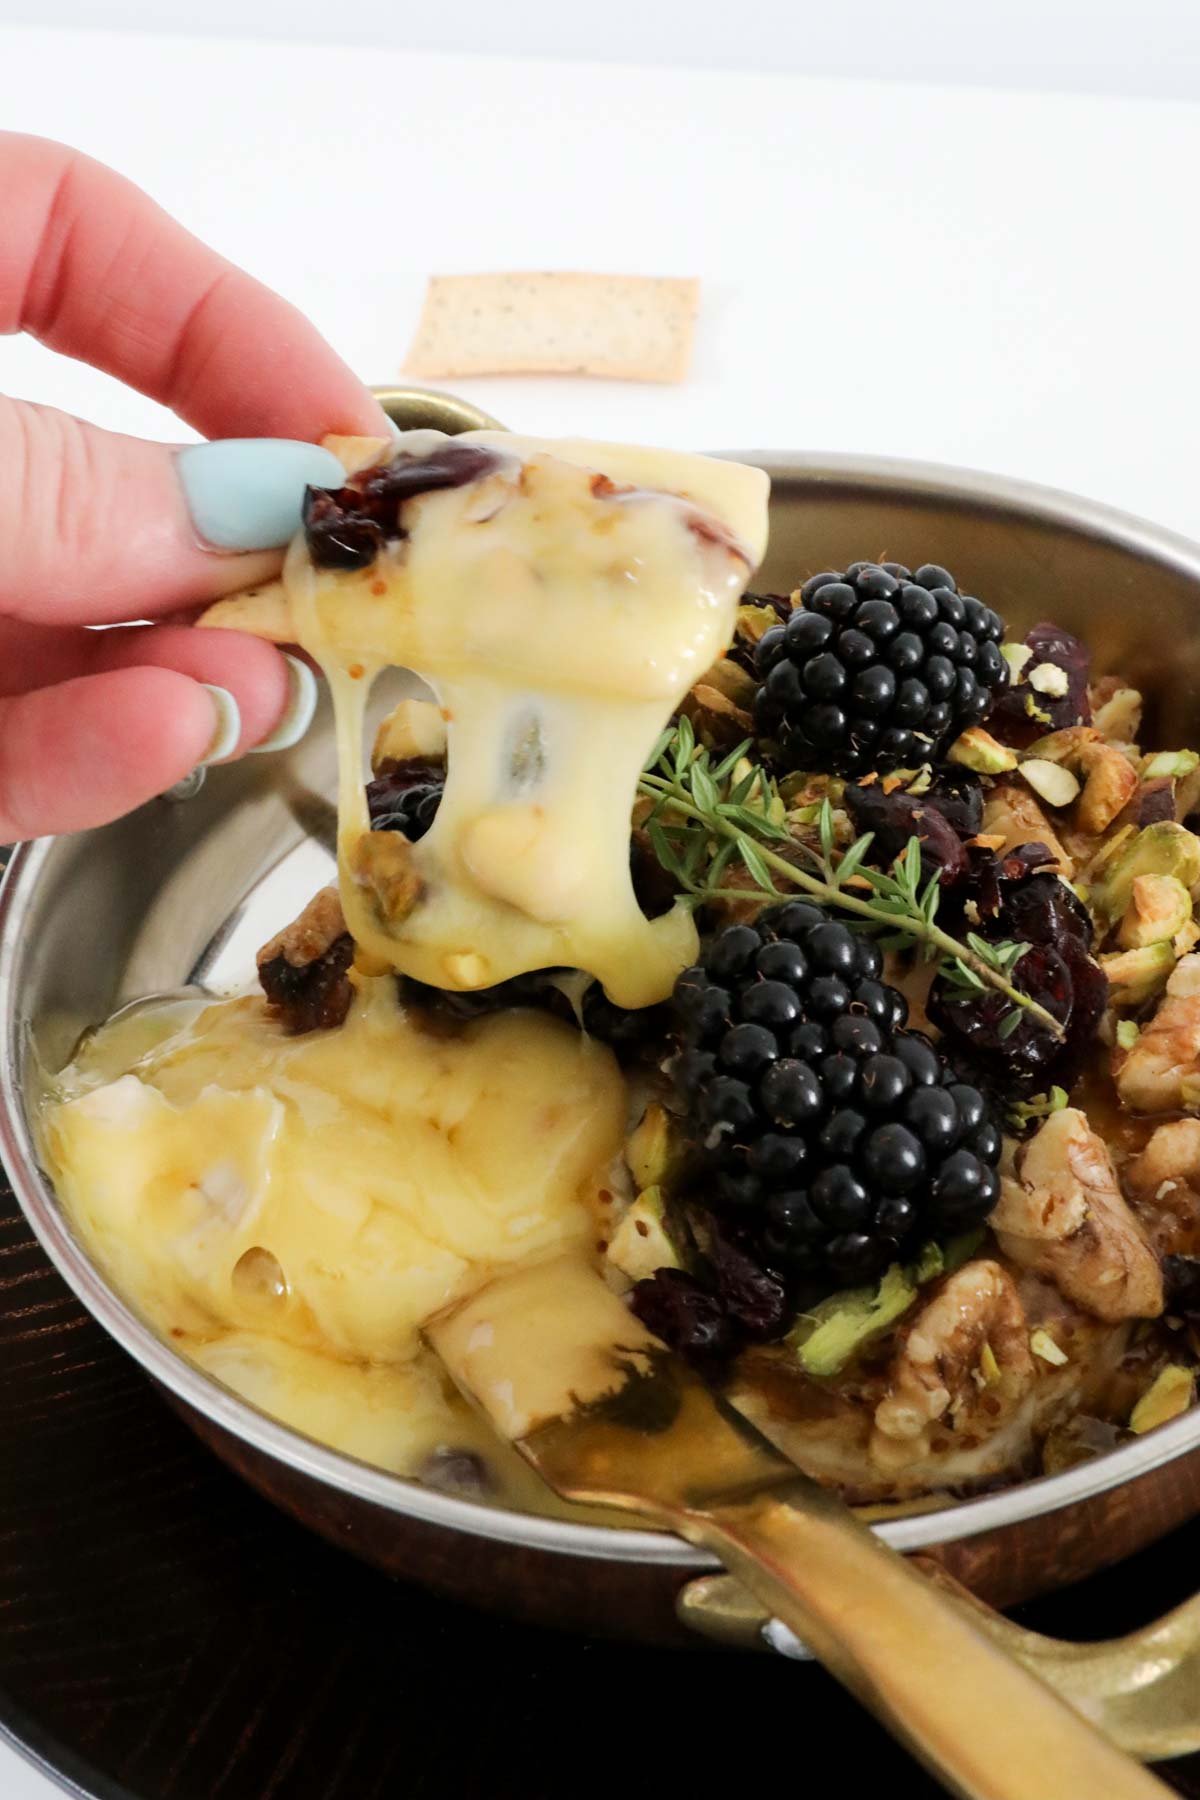 A hand holding a cracker dipped in melted cheese with blackberries.